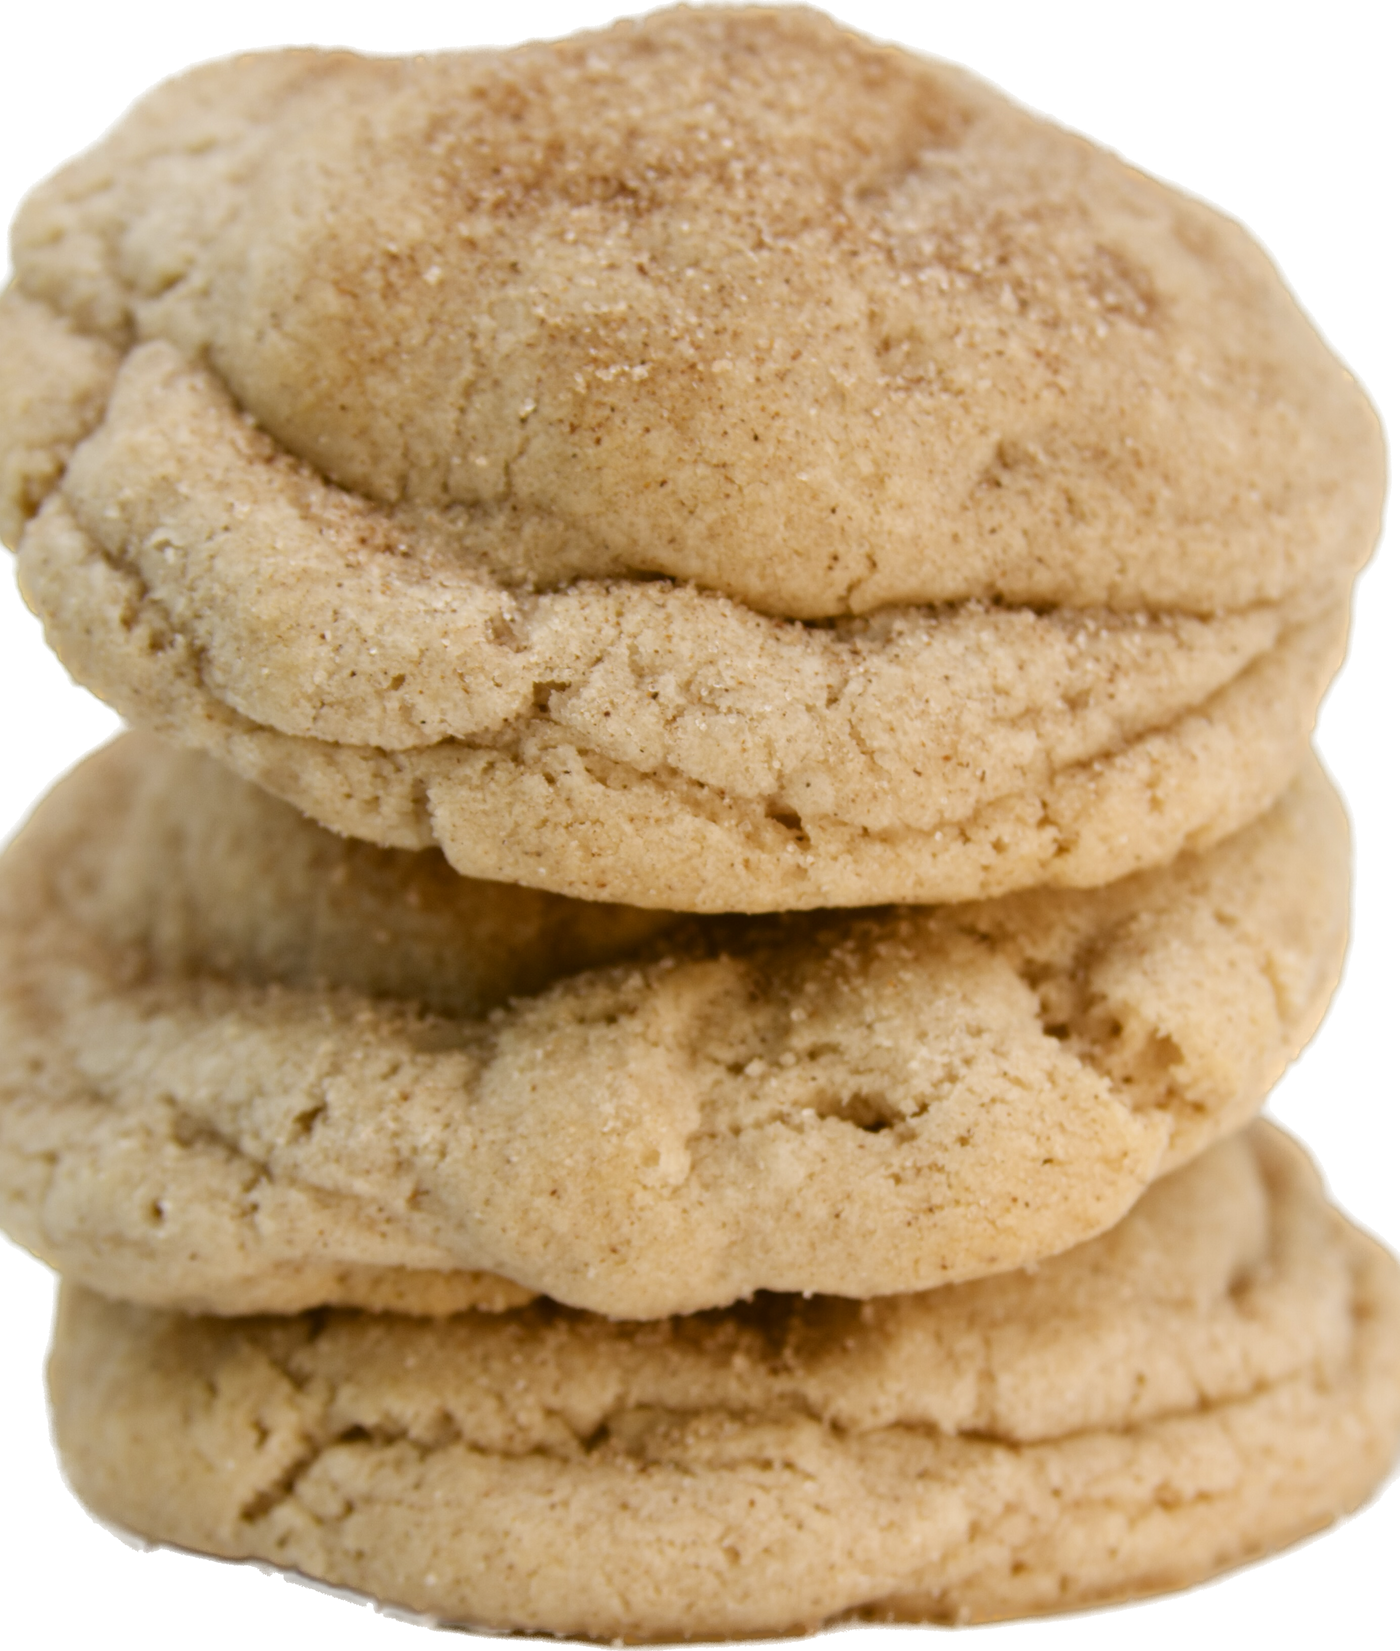 A stack of three soft and chewy snickerdoodle cookies with a generous dusting of cinnamon sugar on top